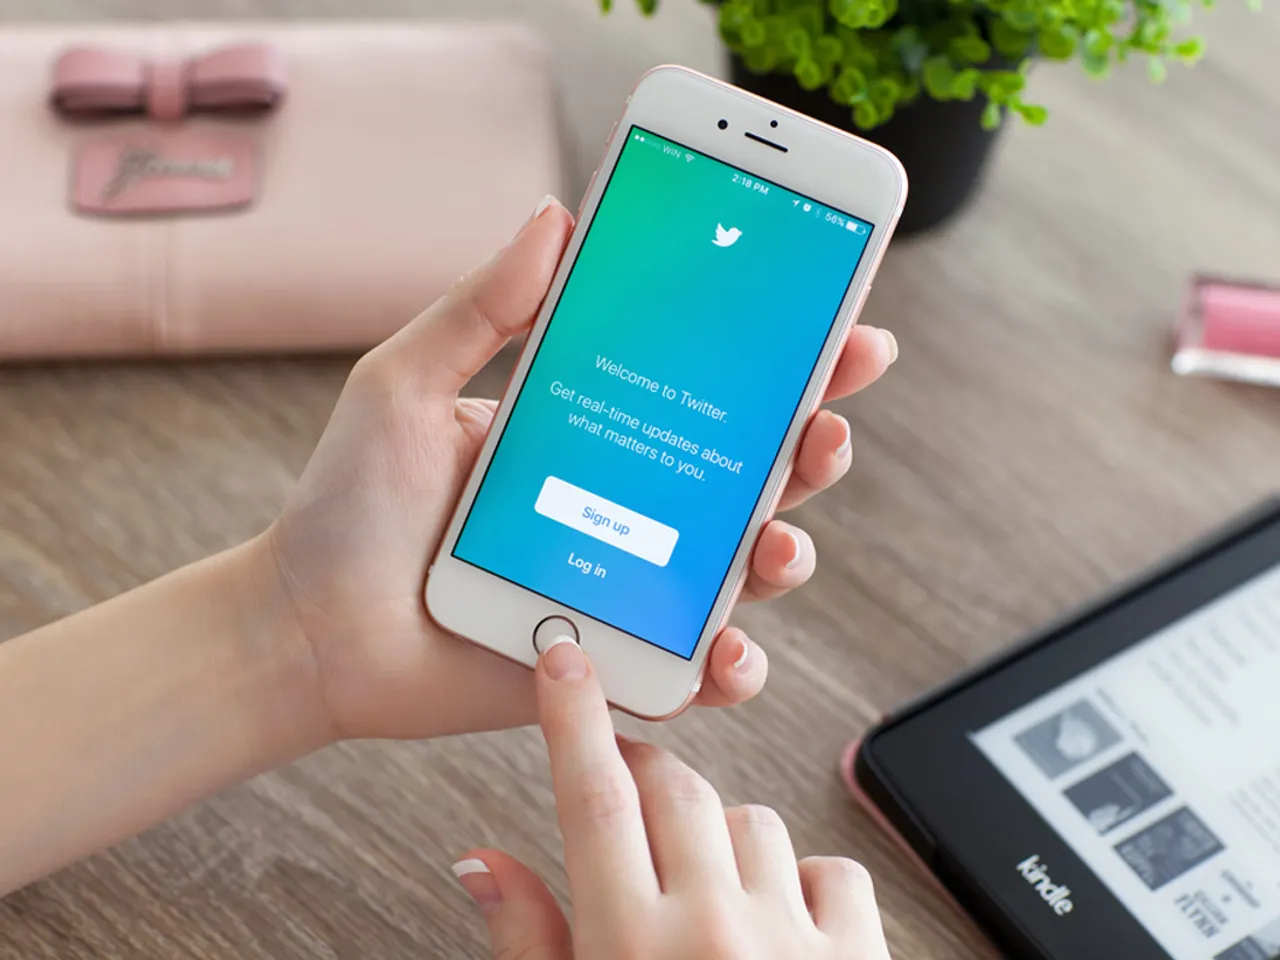 Twitter speculated to scrap character limit for photos and links